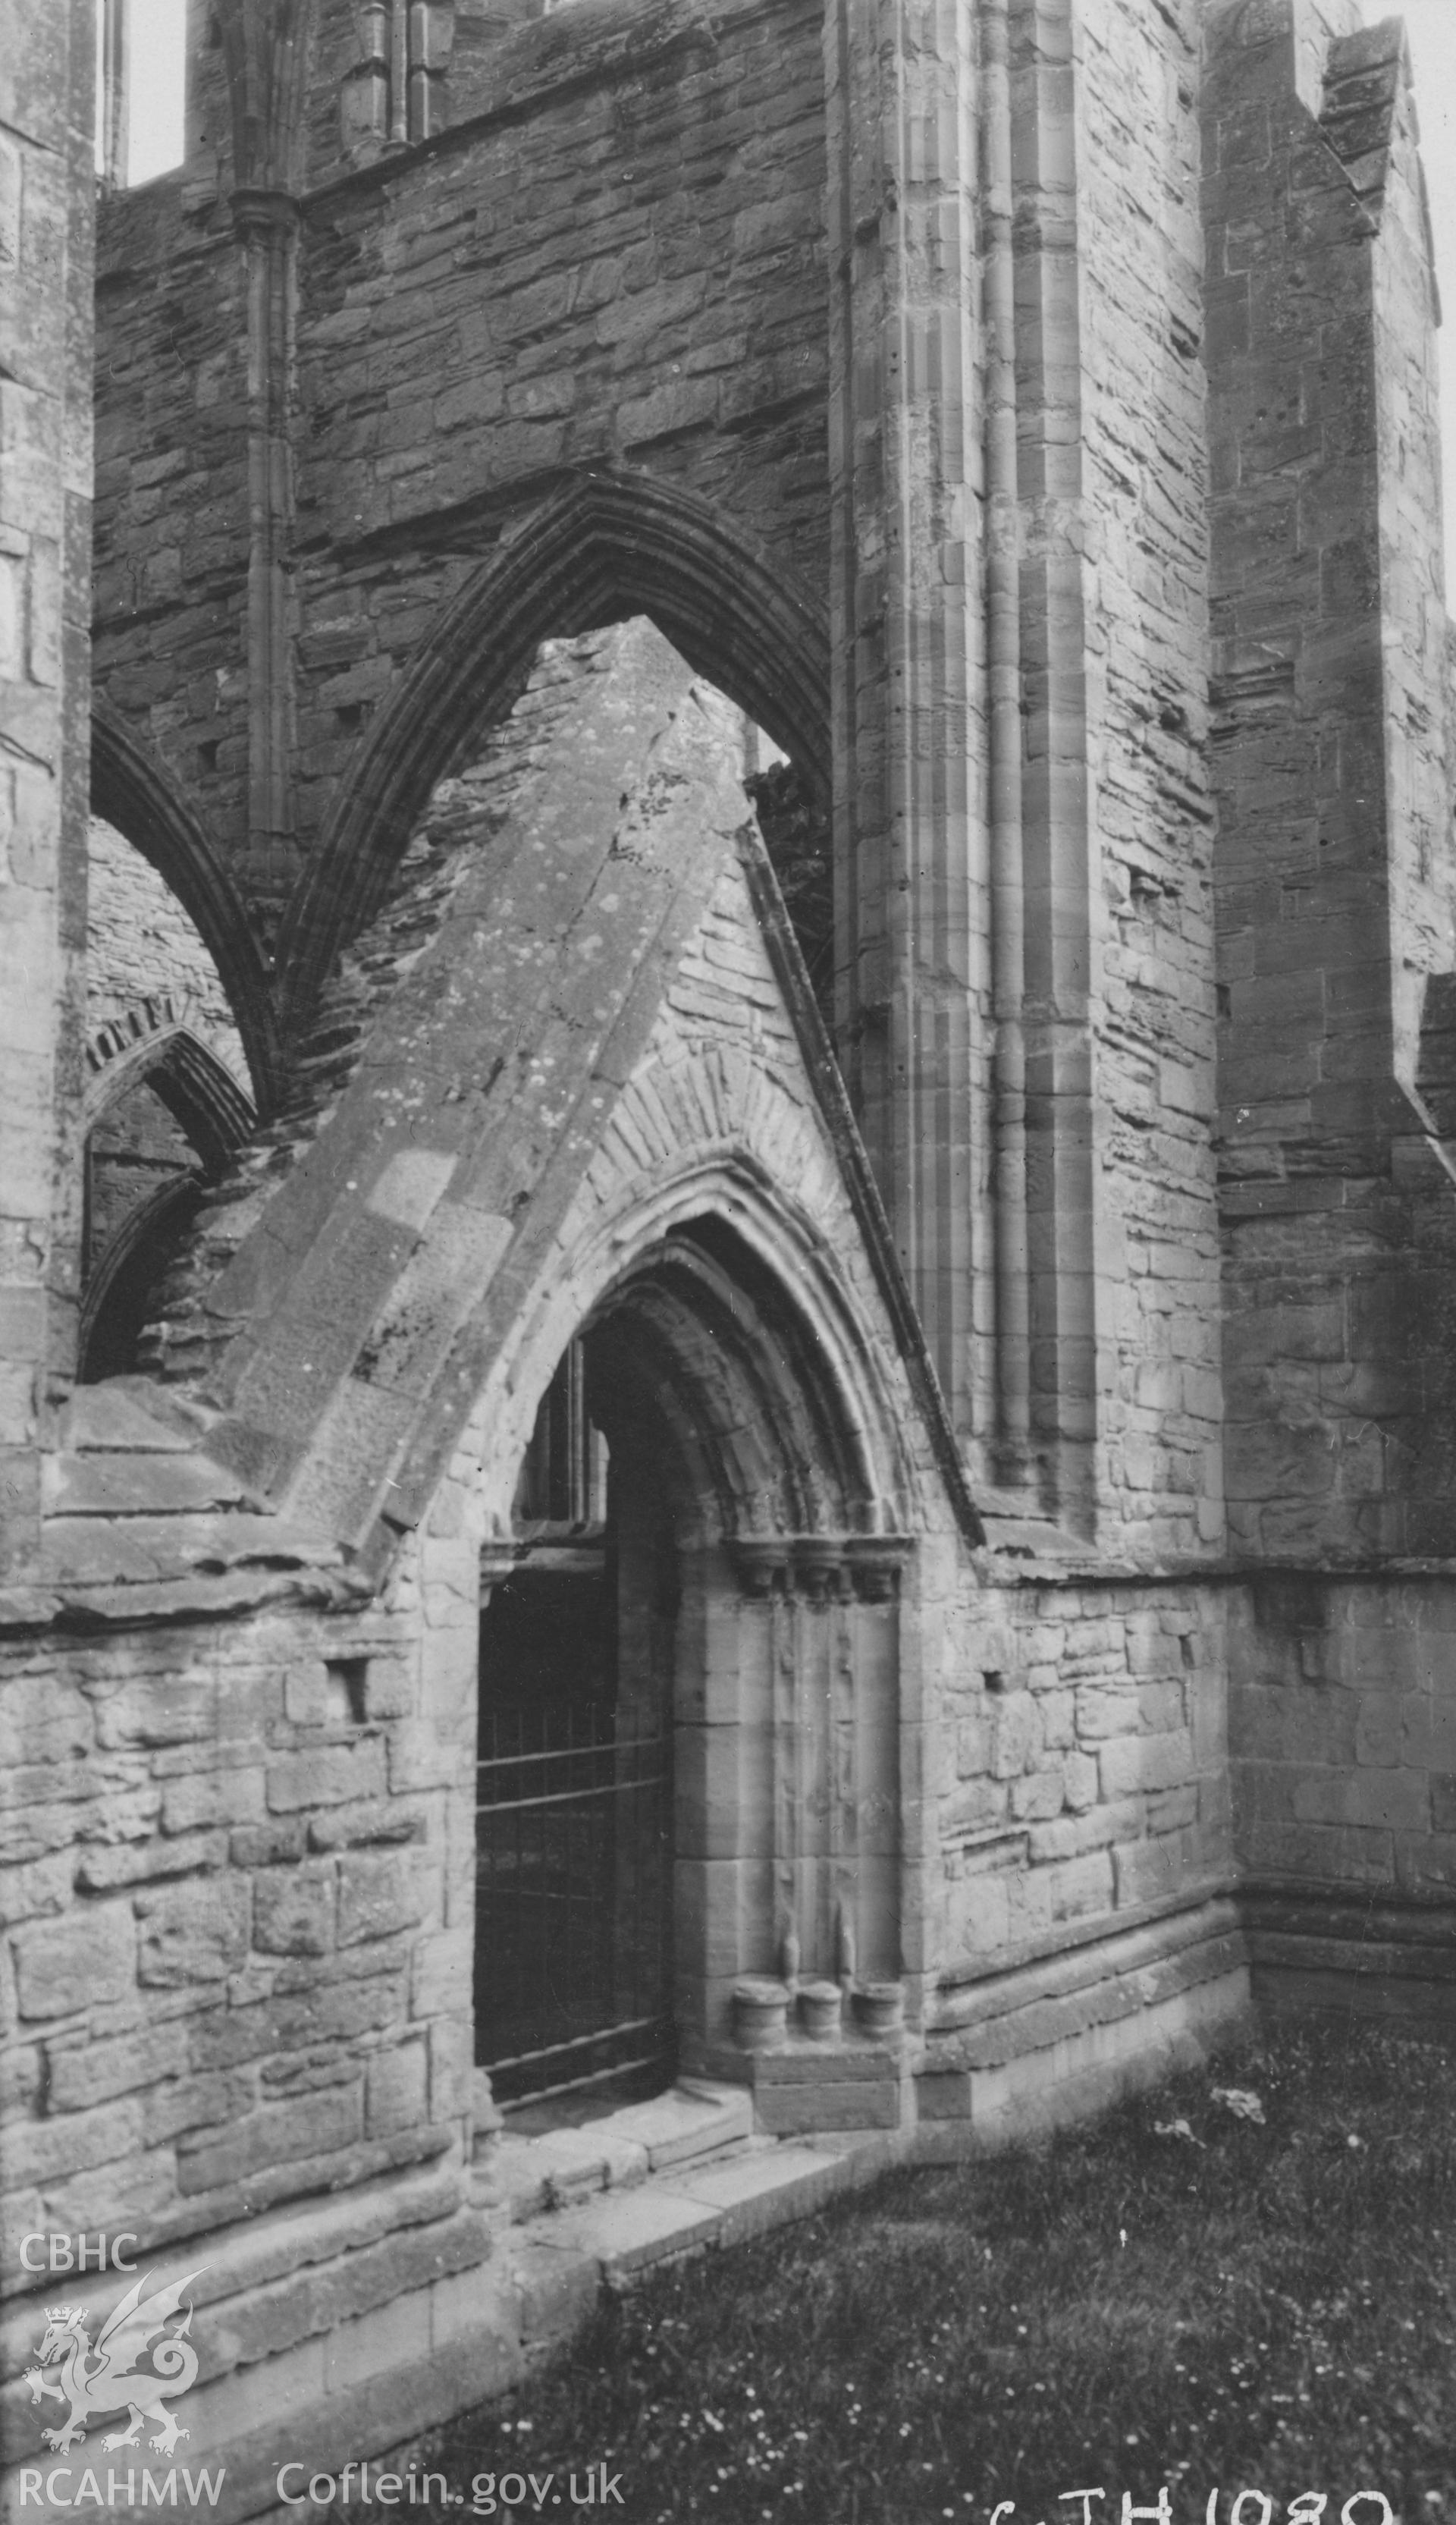 Digital copy of a view of the door to the south transept at Tintern Abbey.